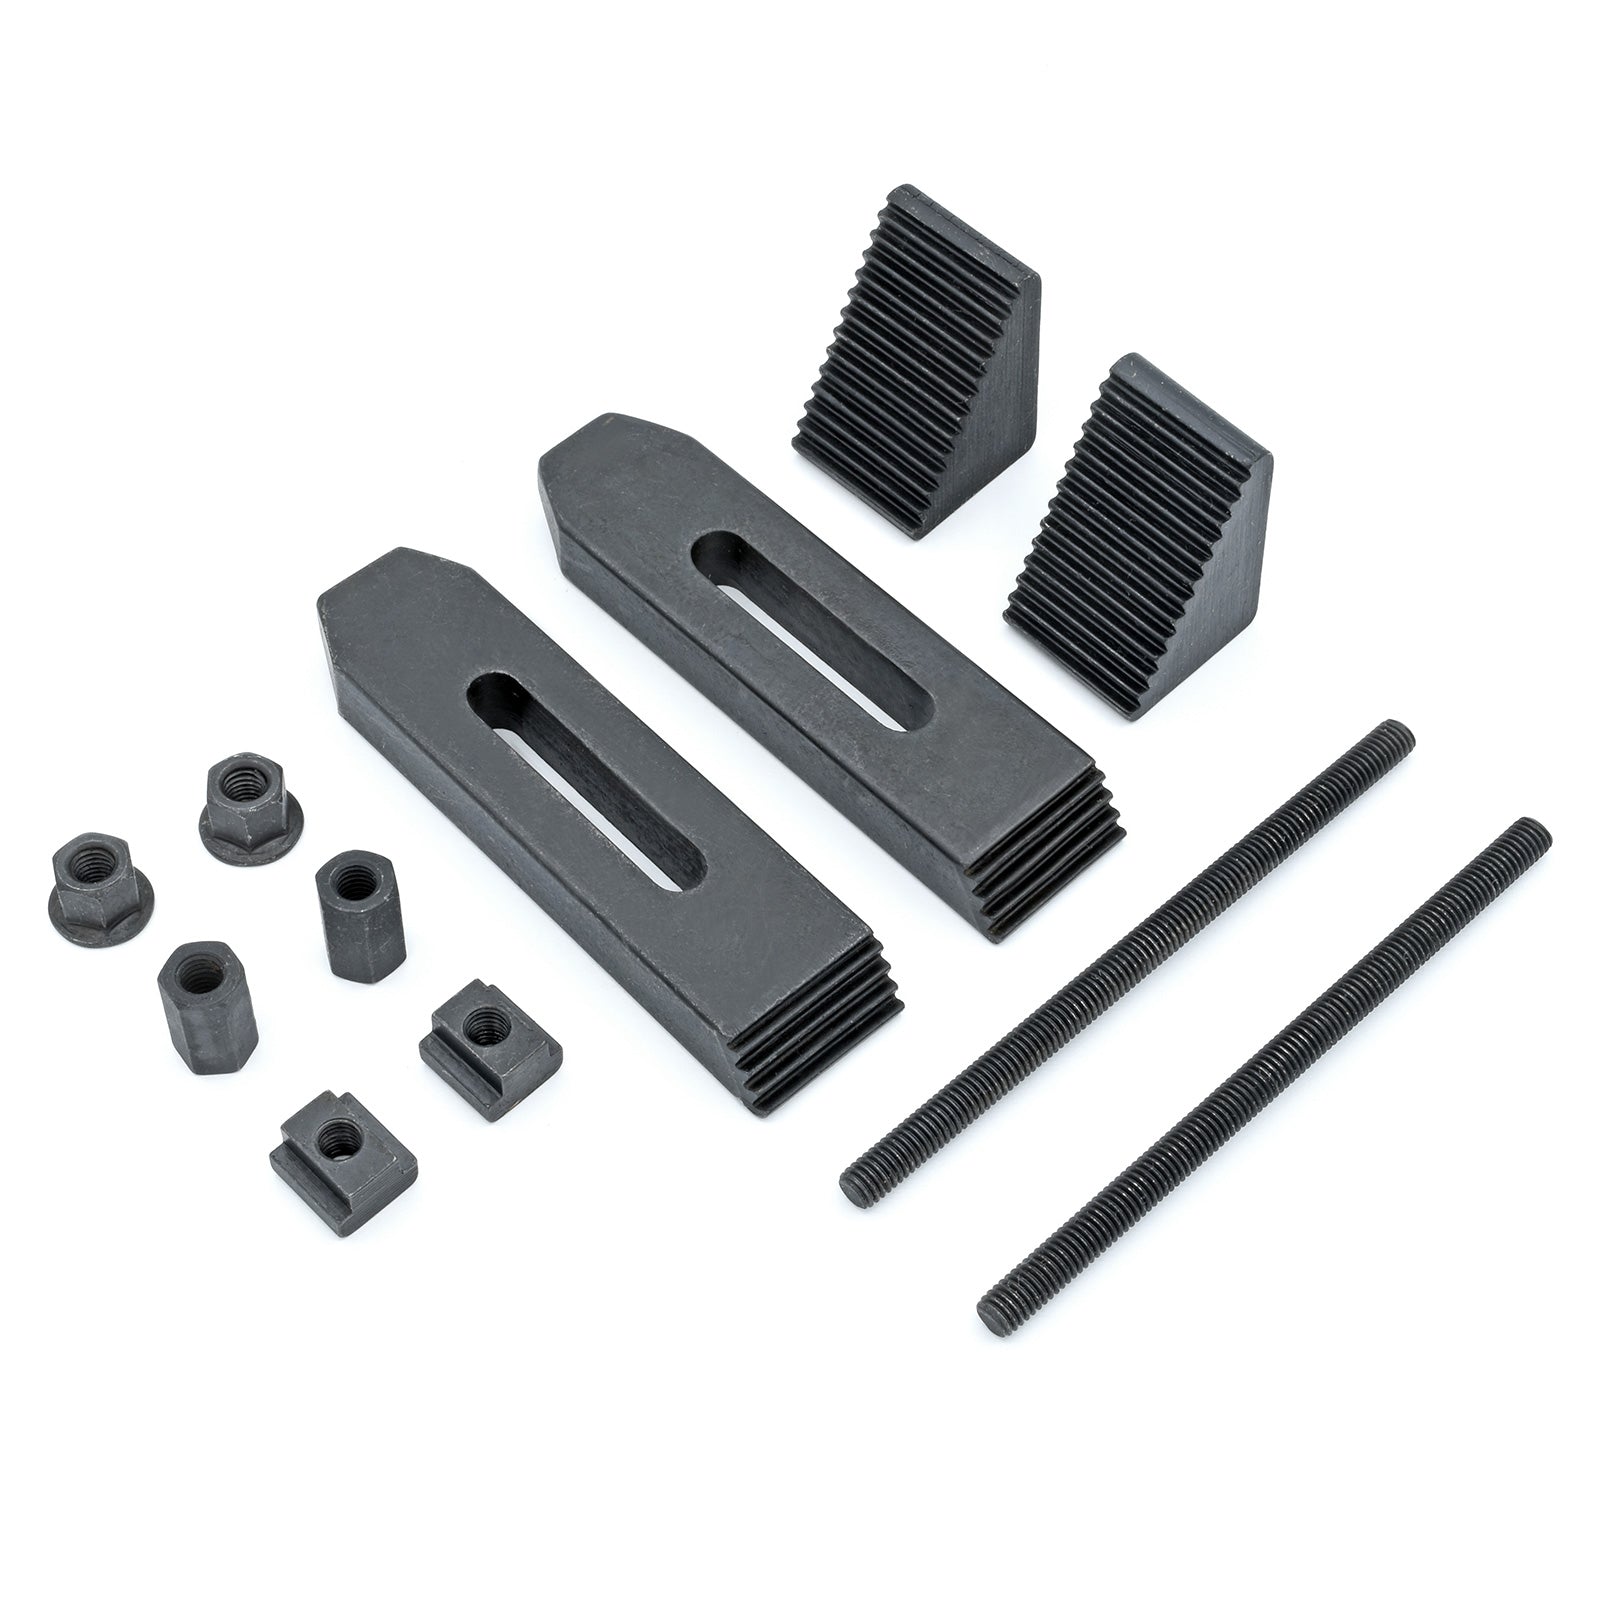 Clamping kit 12 Pieces